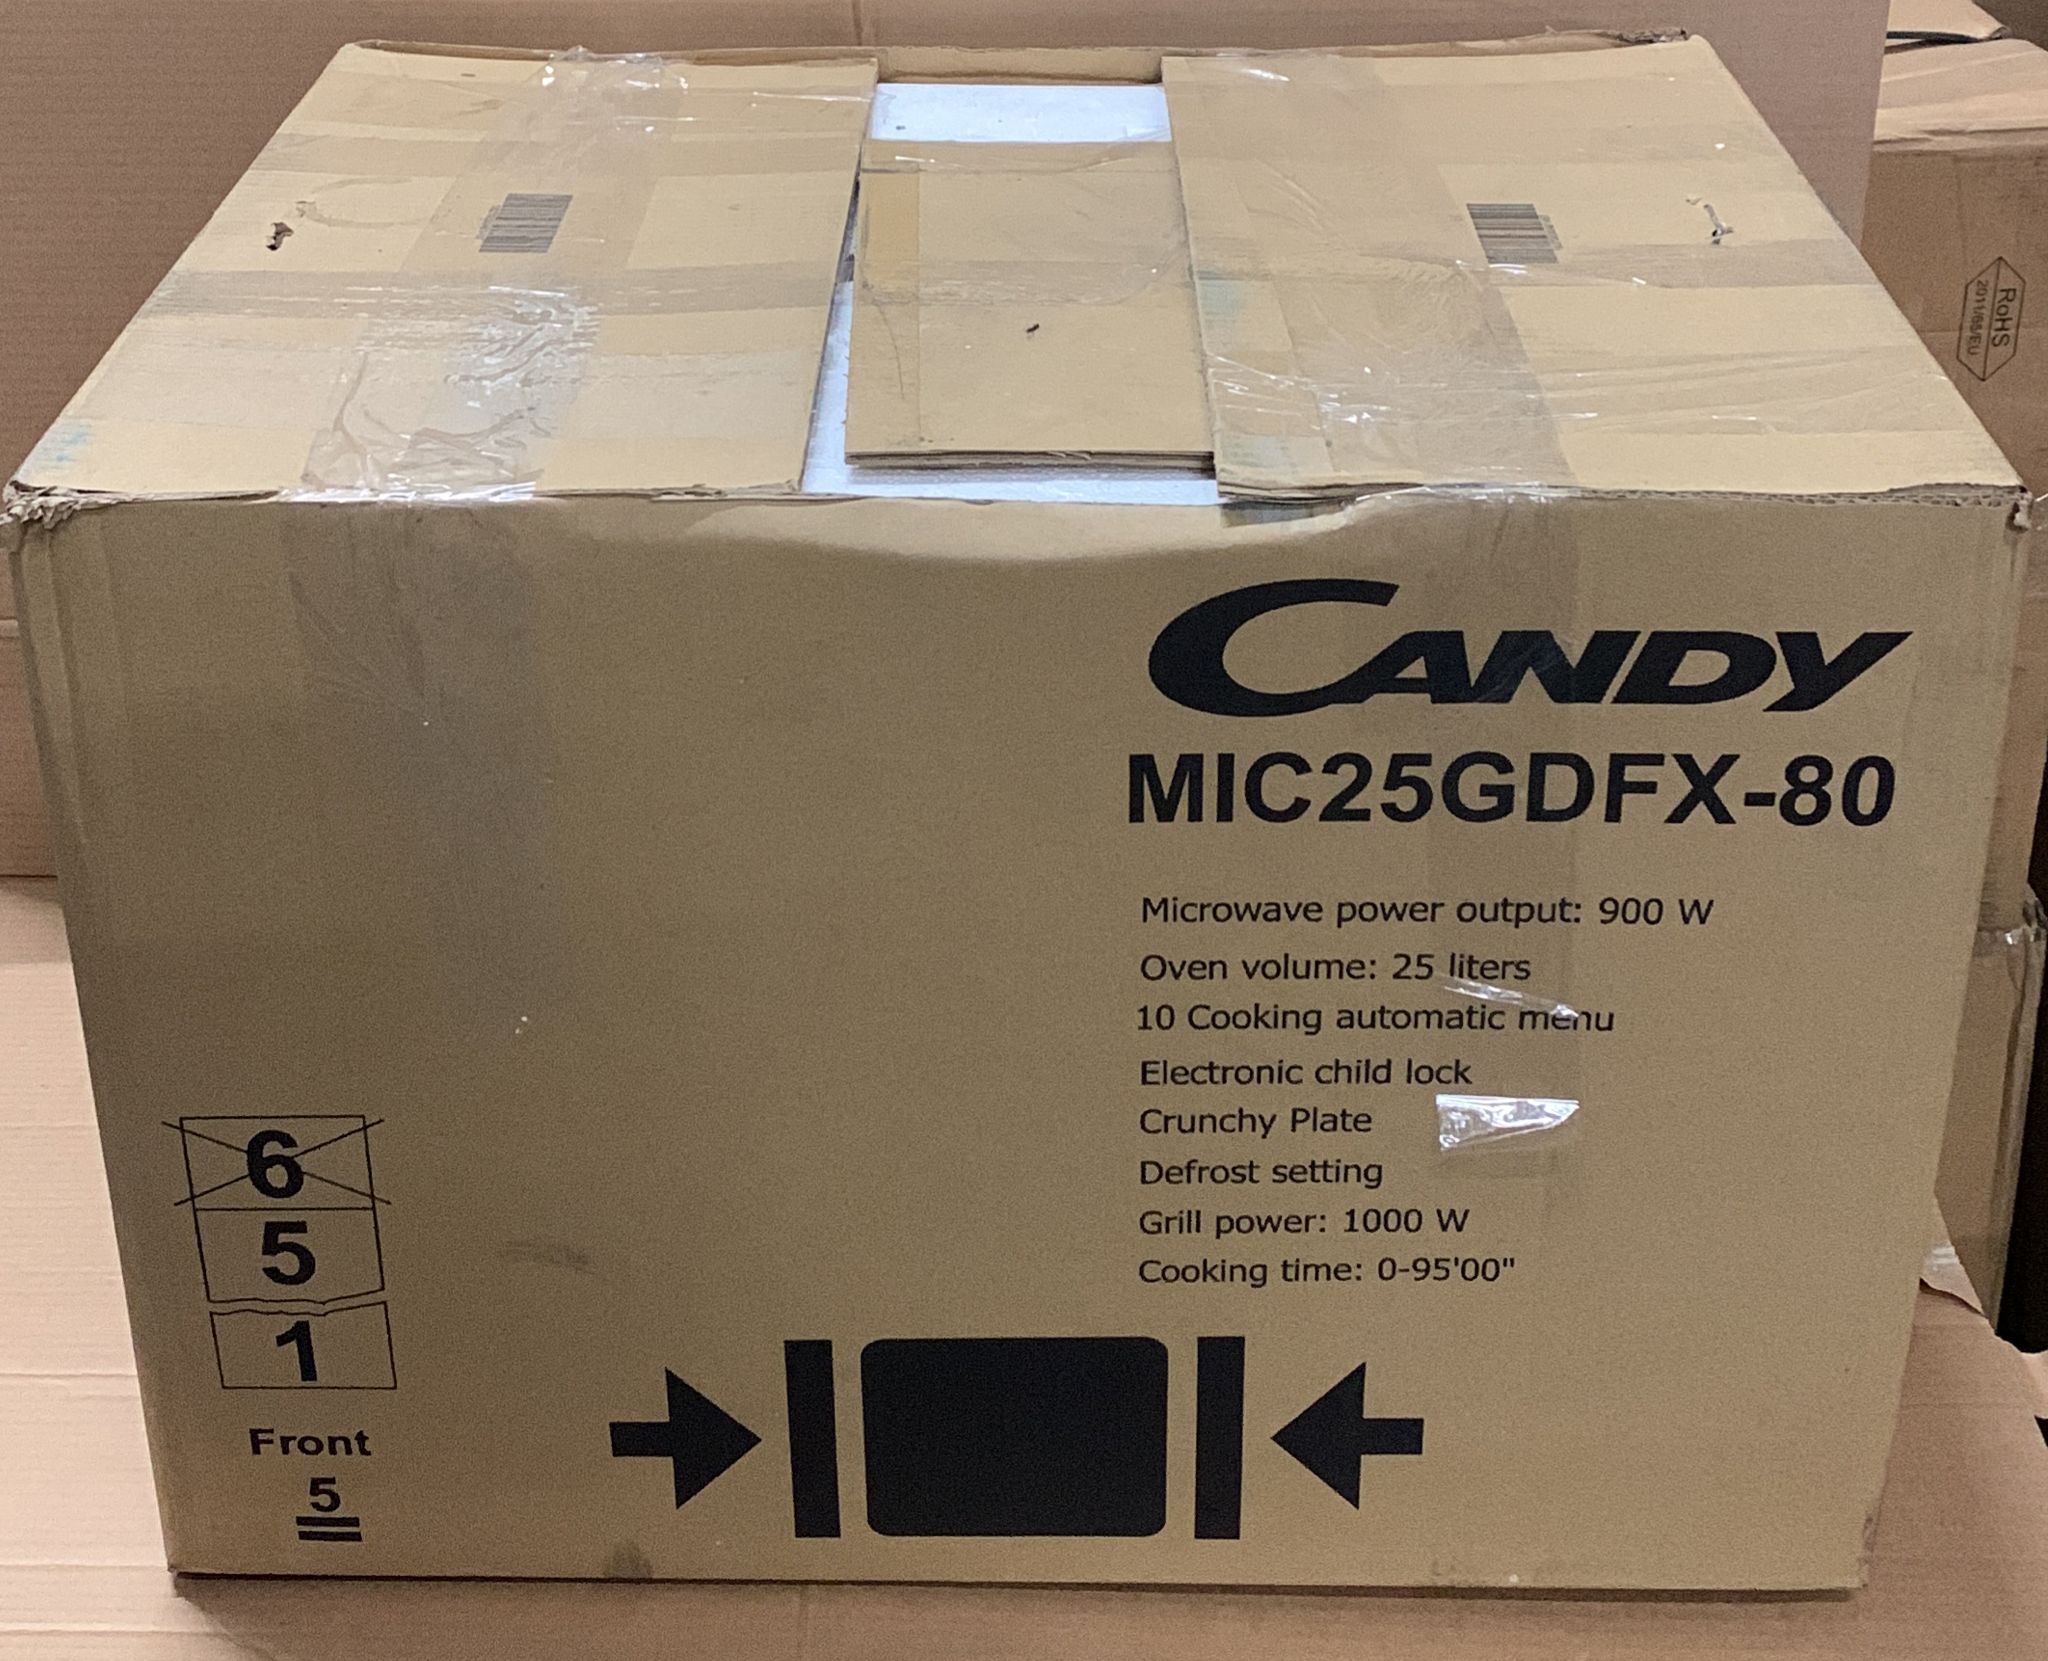 Candy Microwave Frameless Built In Microwave MIC25GDFX-80 -2642